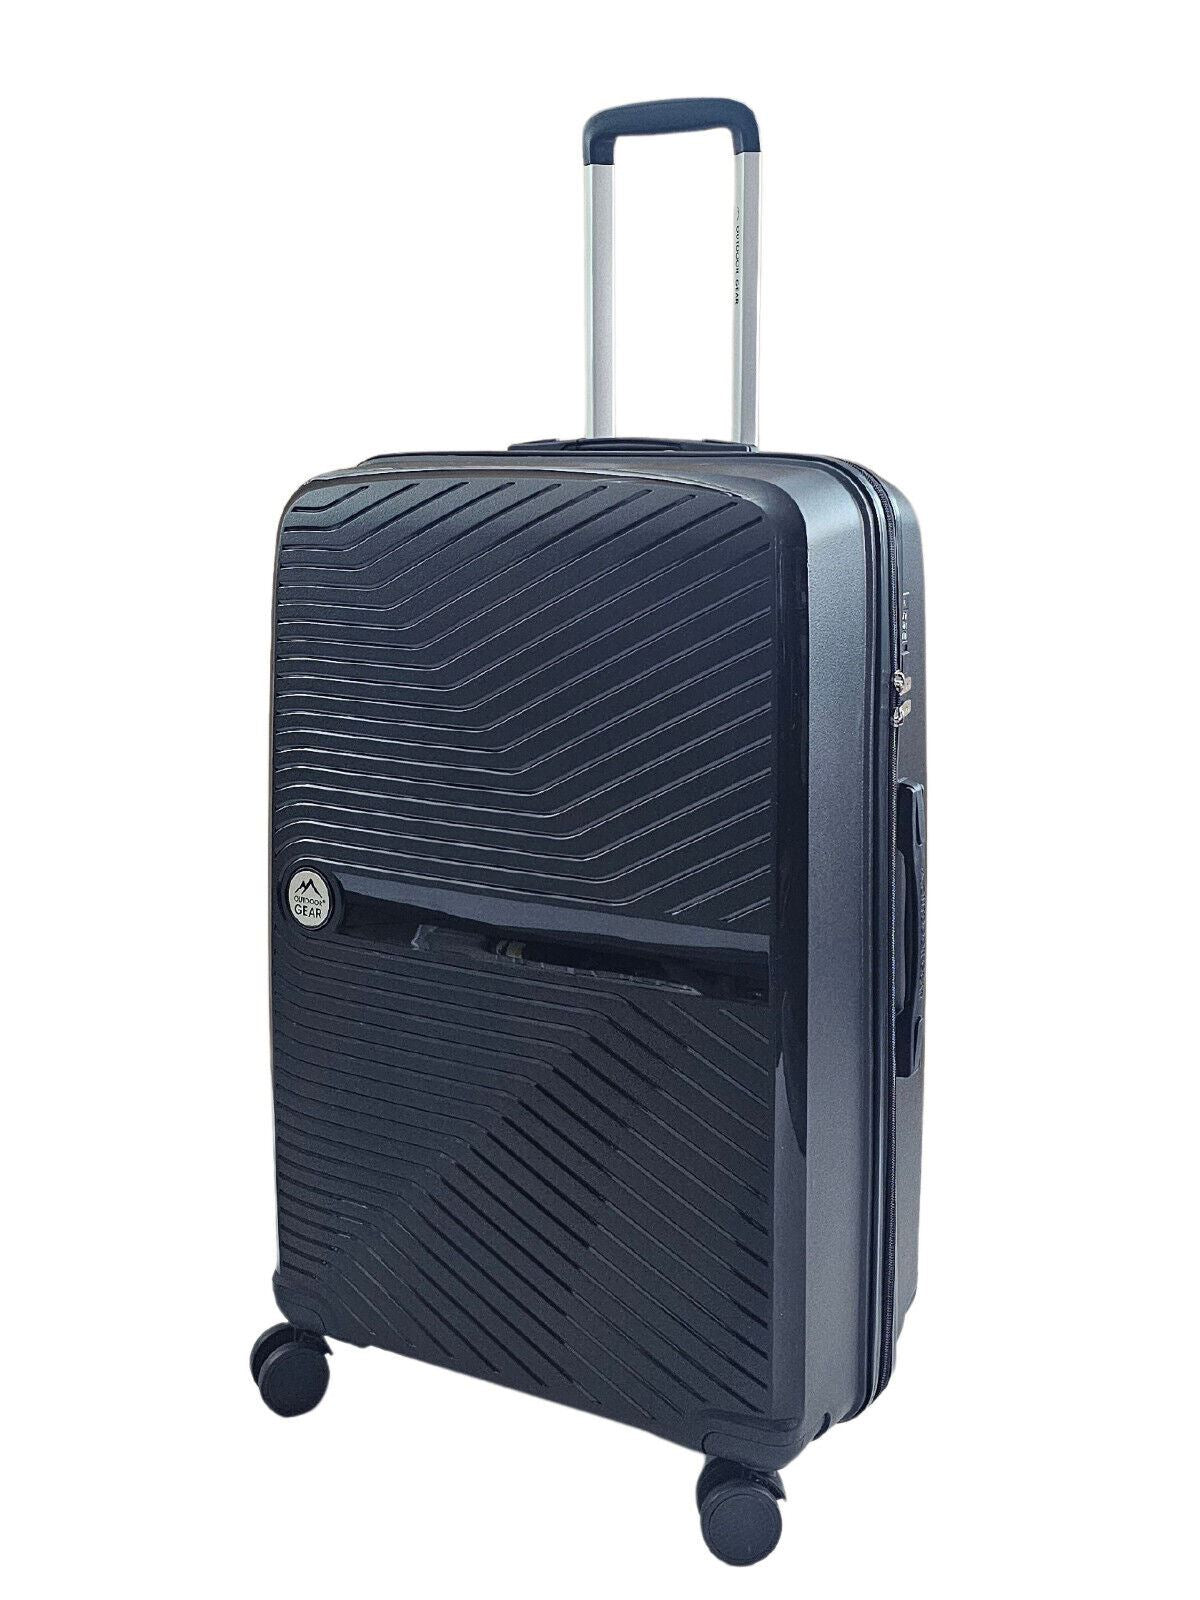 Abbeville Large Hard Shell Suitcase in Black